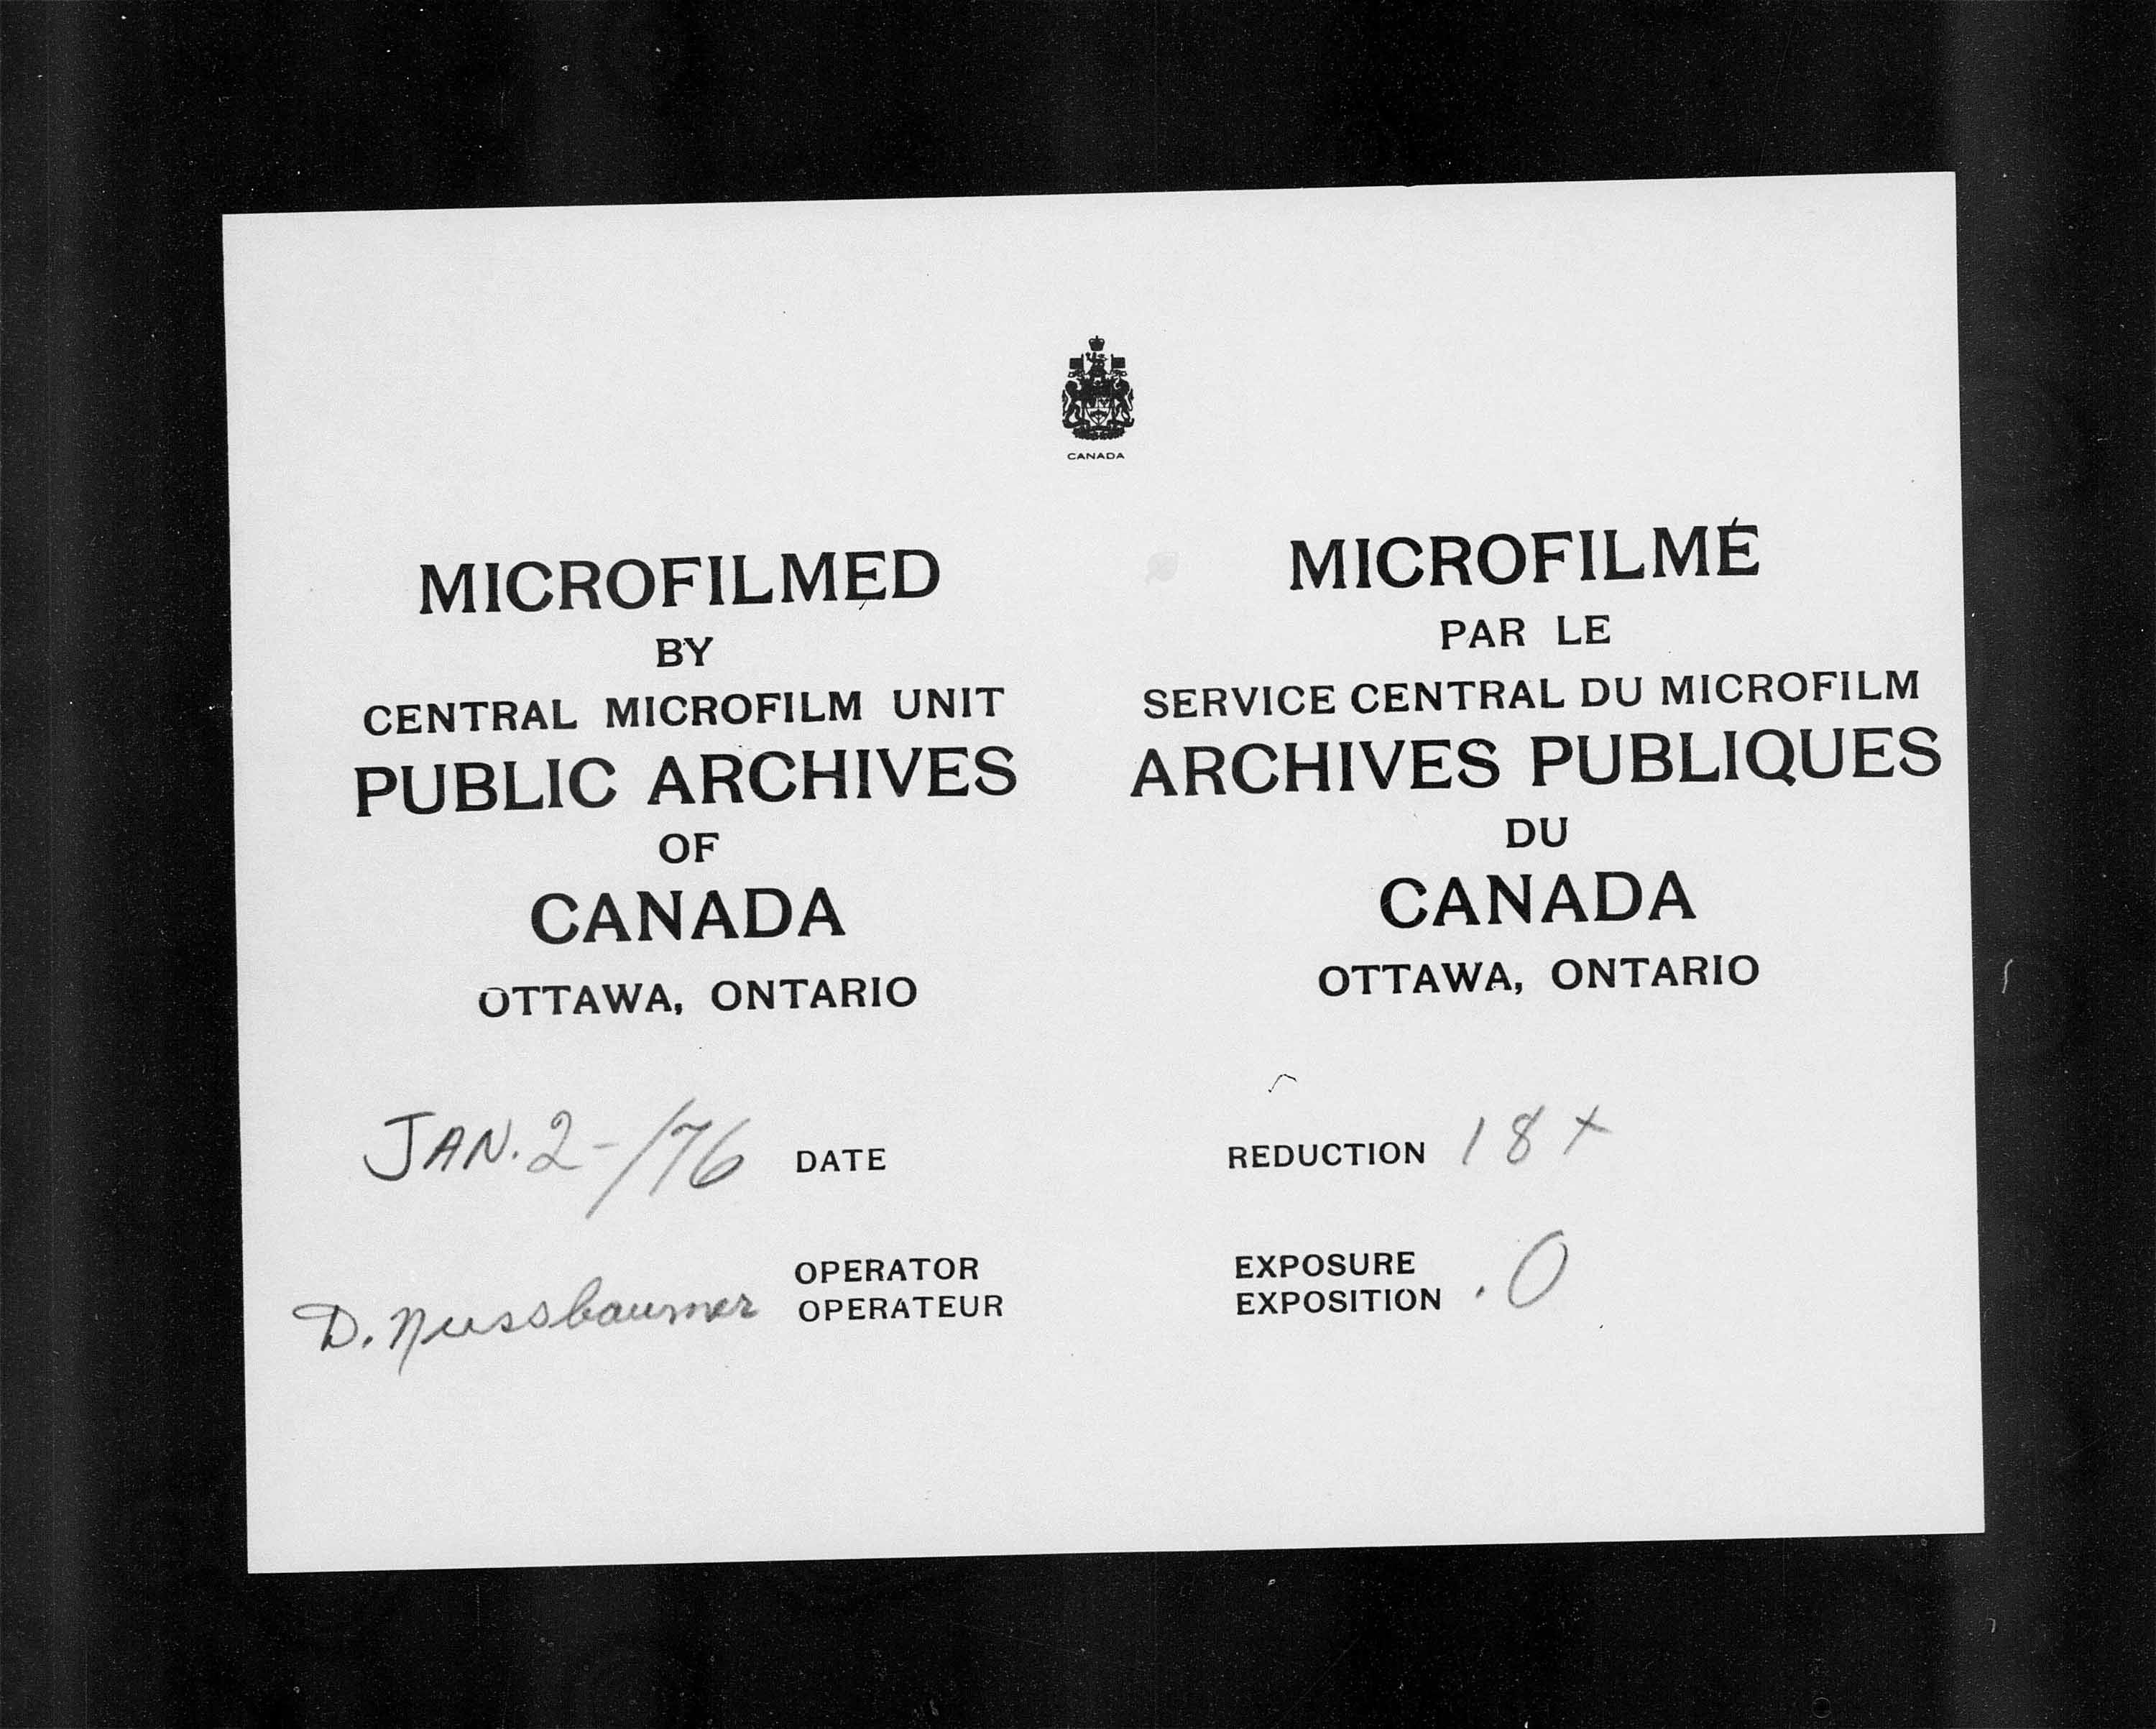 Title: Census of Canada, 1871 - Mikan Number: 142105 - Microform: c-10000